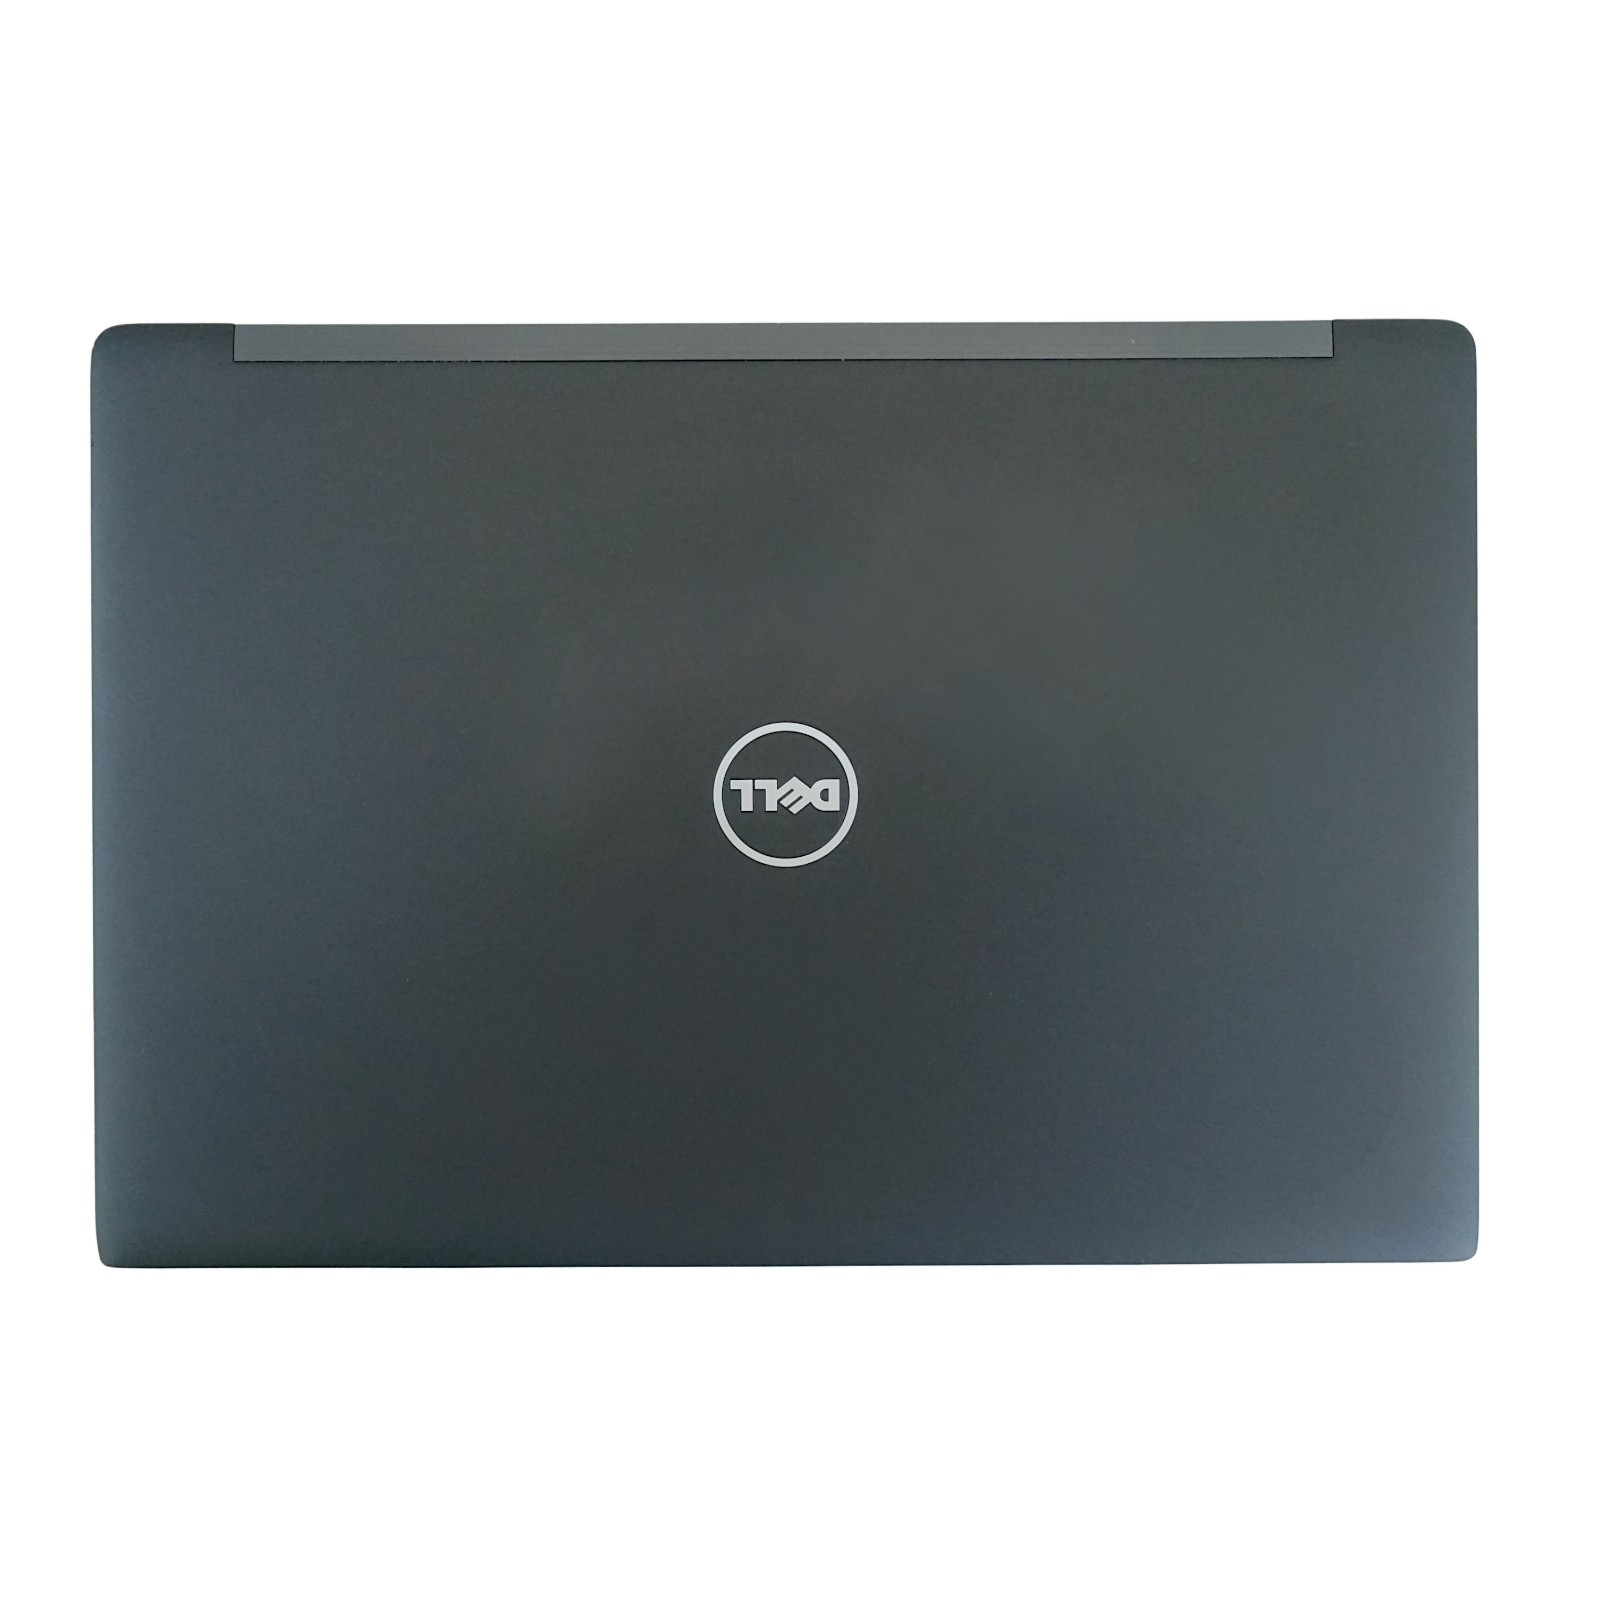 Dell Latitude 7280 12 Inch Laptop (US Keyboard) | Configure To Order